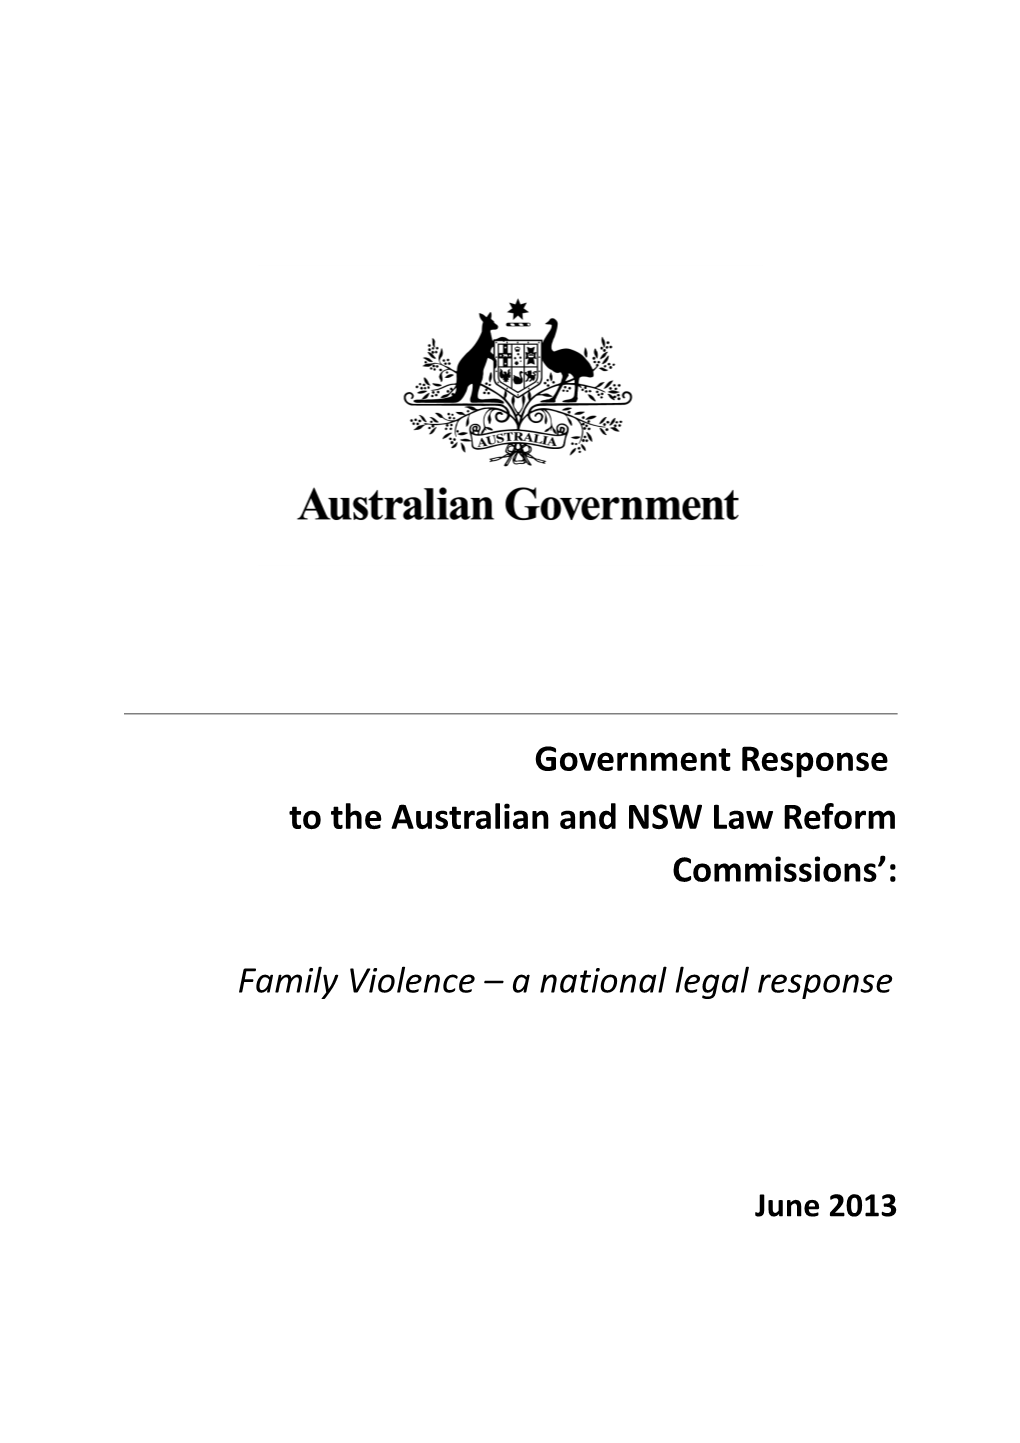 Australian Government Response to the Australian and NSW Law Reform Commission Report Family